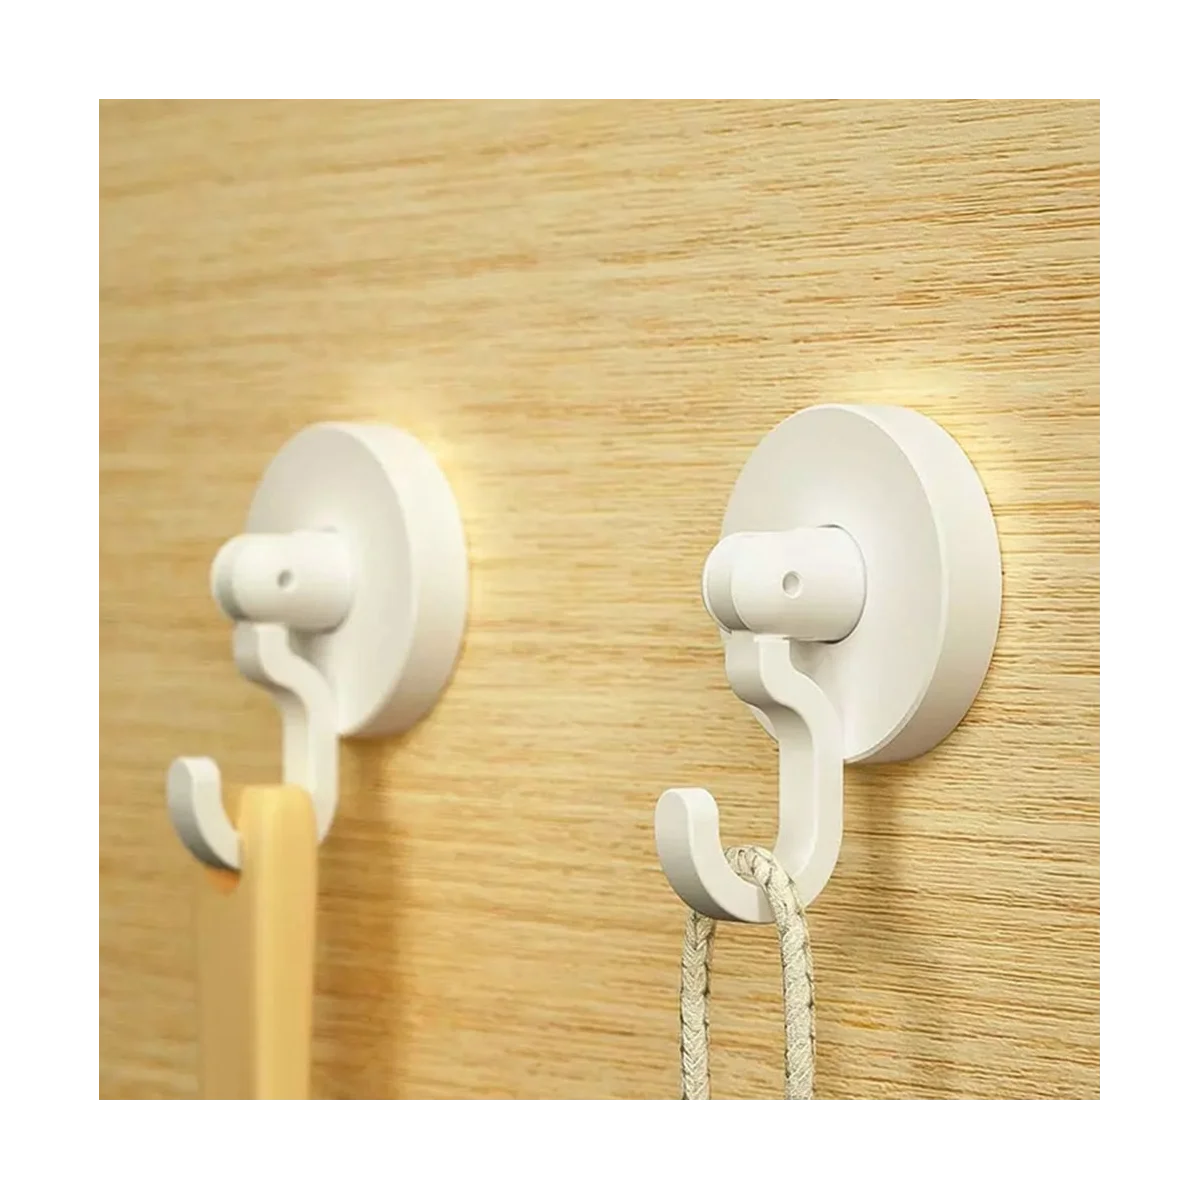 

18PCS Adhesive Ceiling and Wall Hooks - Round Swivel Spinning Turn 360°/180° No Drill Stick on Hook for Hanging